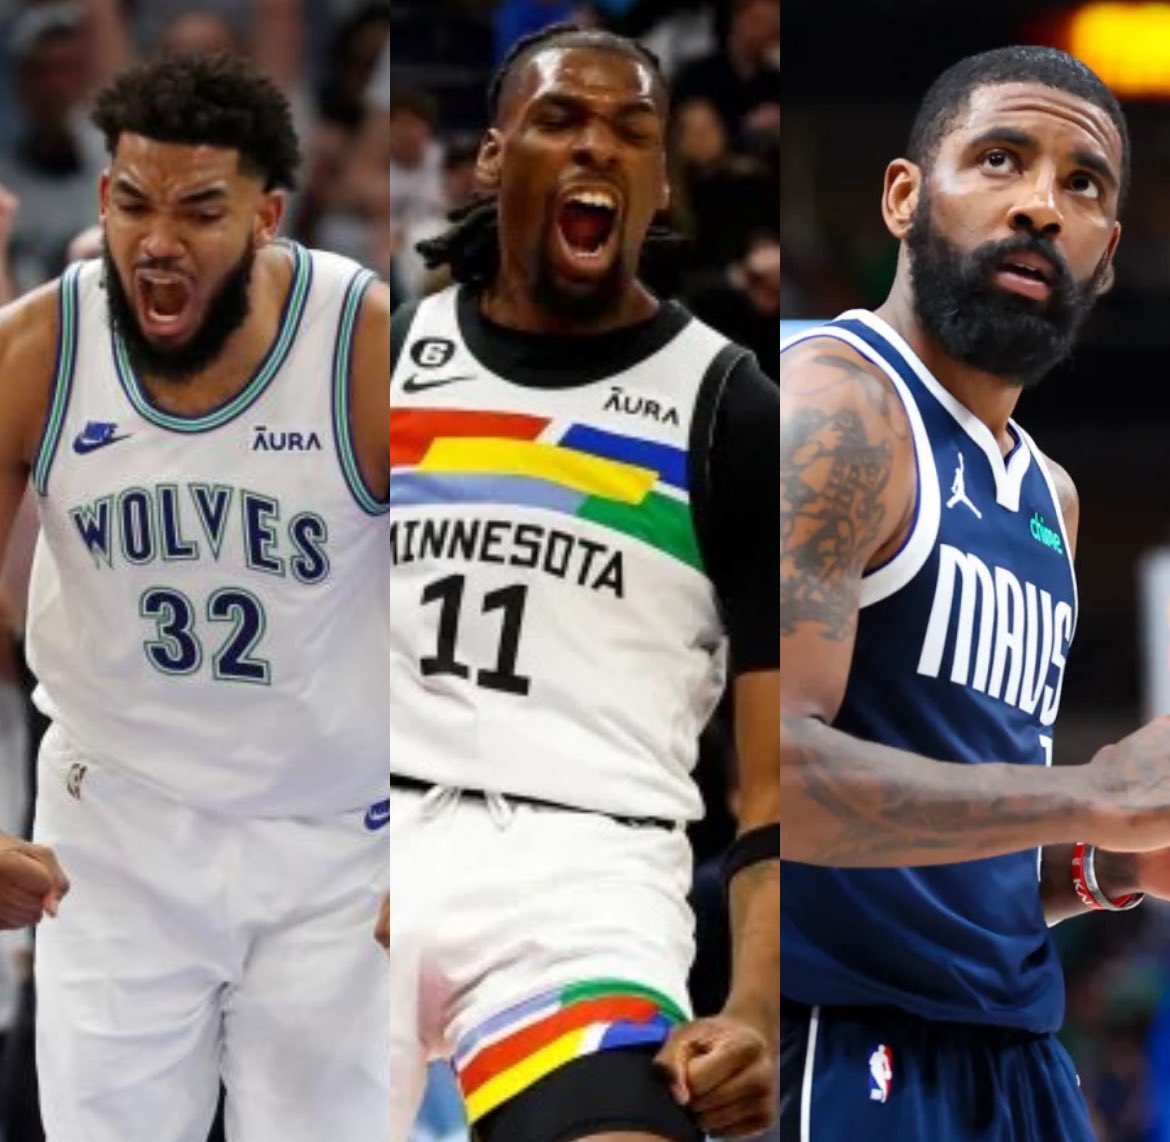 BEST NBA PLAYS (5/26) ⭐️🏀 Karl Towns “O” 19.5 Points (-130 MGM) Naz Reid “O” 1.5 3PM (-140 MGM) Kyrie Irving “U” 27.5 P+A (-125 MGM) If theses plays cash ill give $20 to someone who likes ❤️👀 #giveaway #basketball #sportsbet #PrizePicks #nbaplayoffs #nba #GamblingX